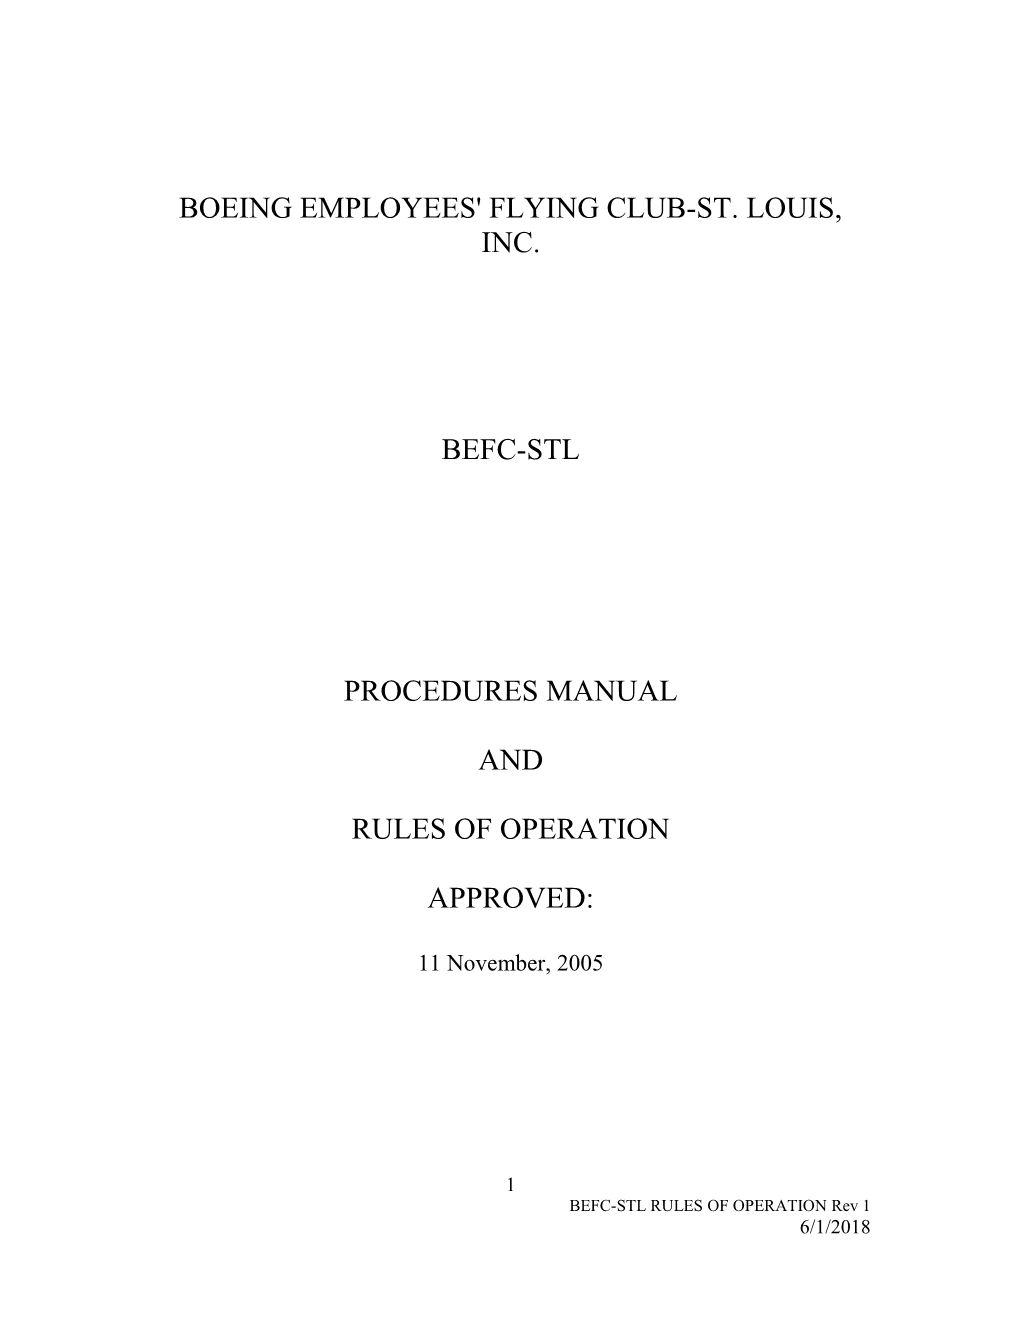 Boeing Employees' Flying Club-St. Louis, Inc